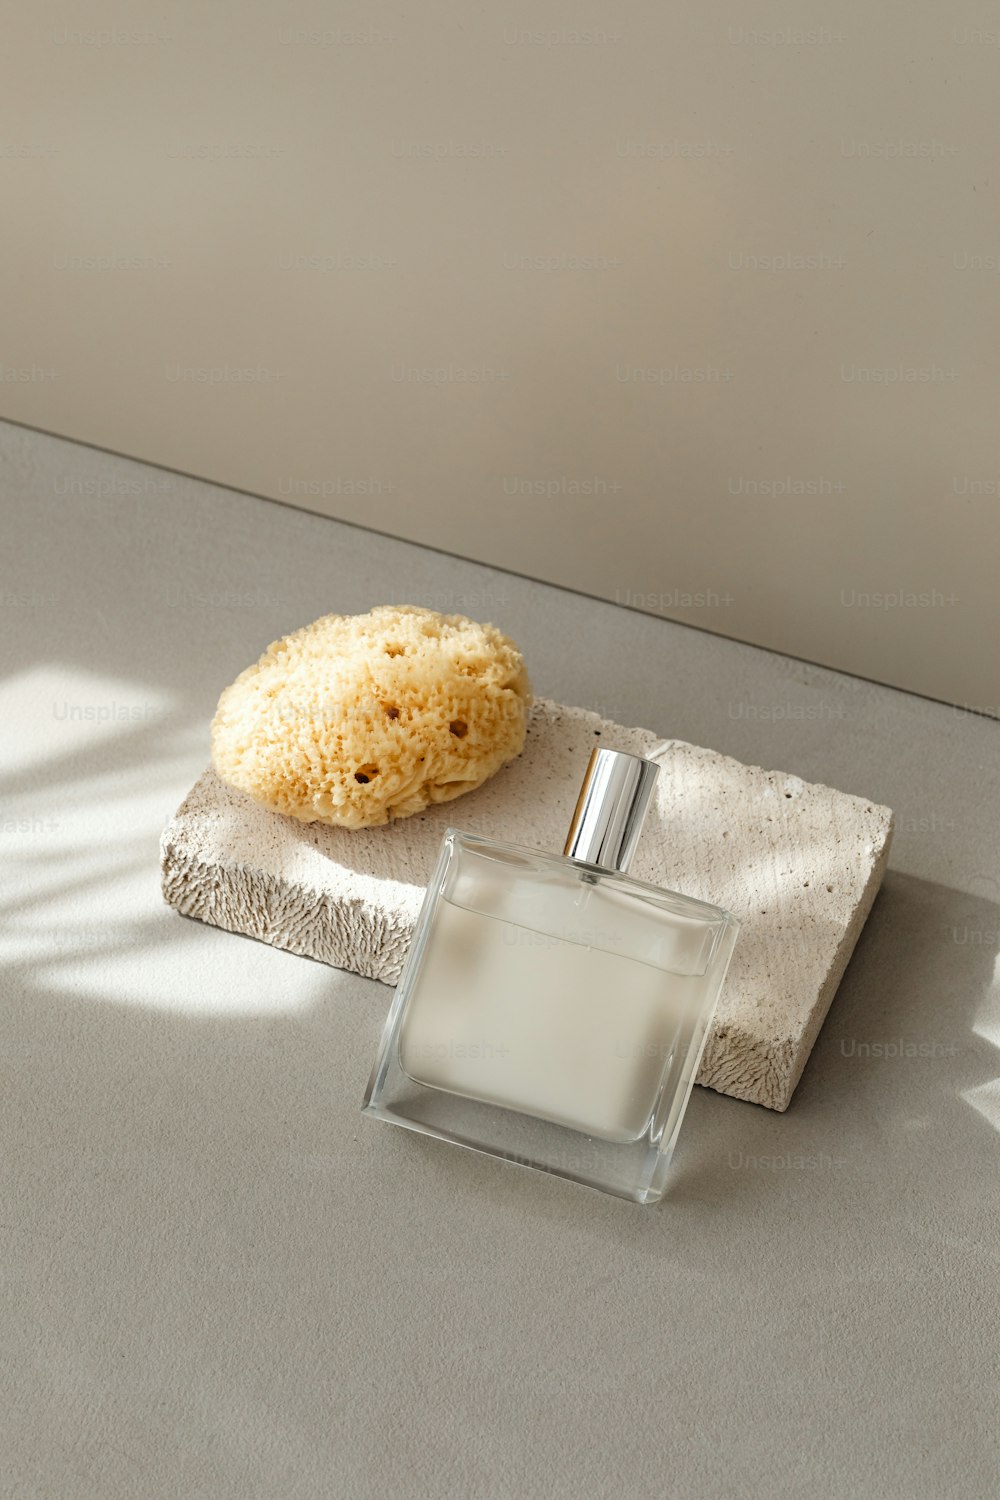 a bottle of cologne next to a cookie on a napkin